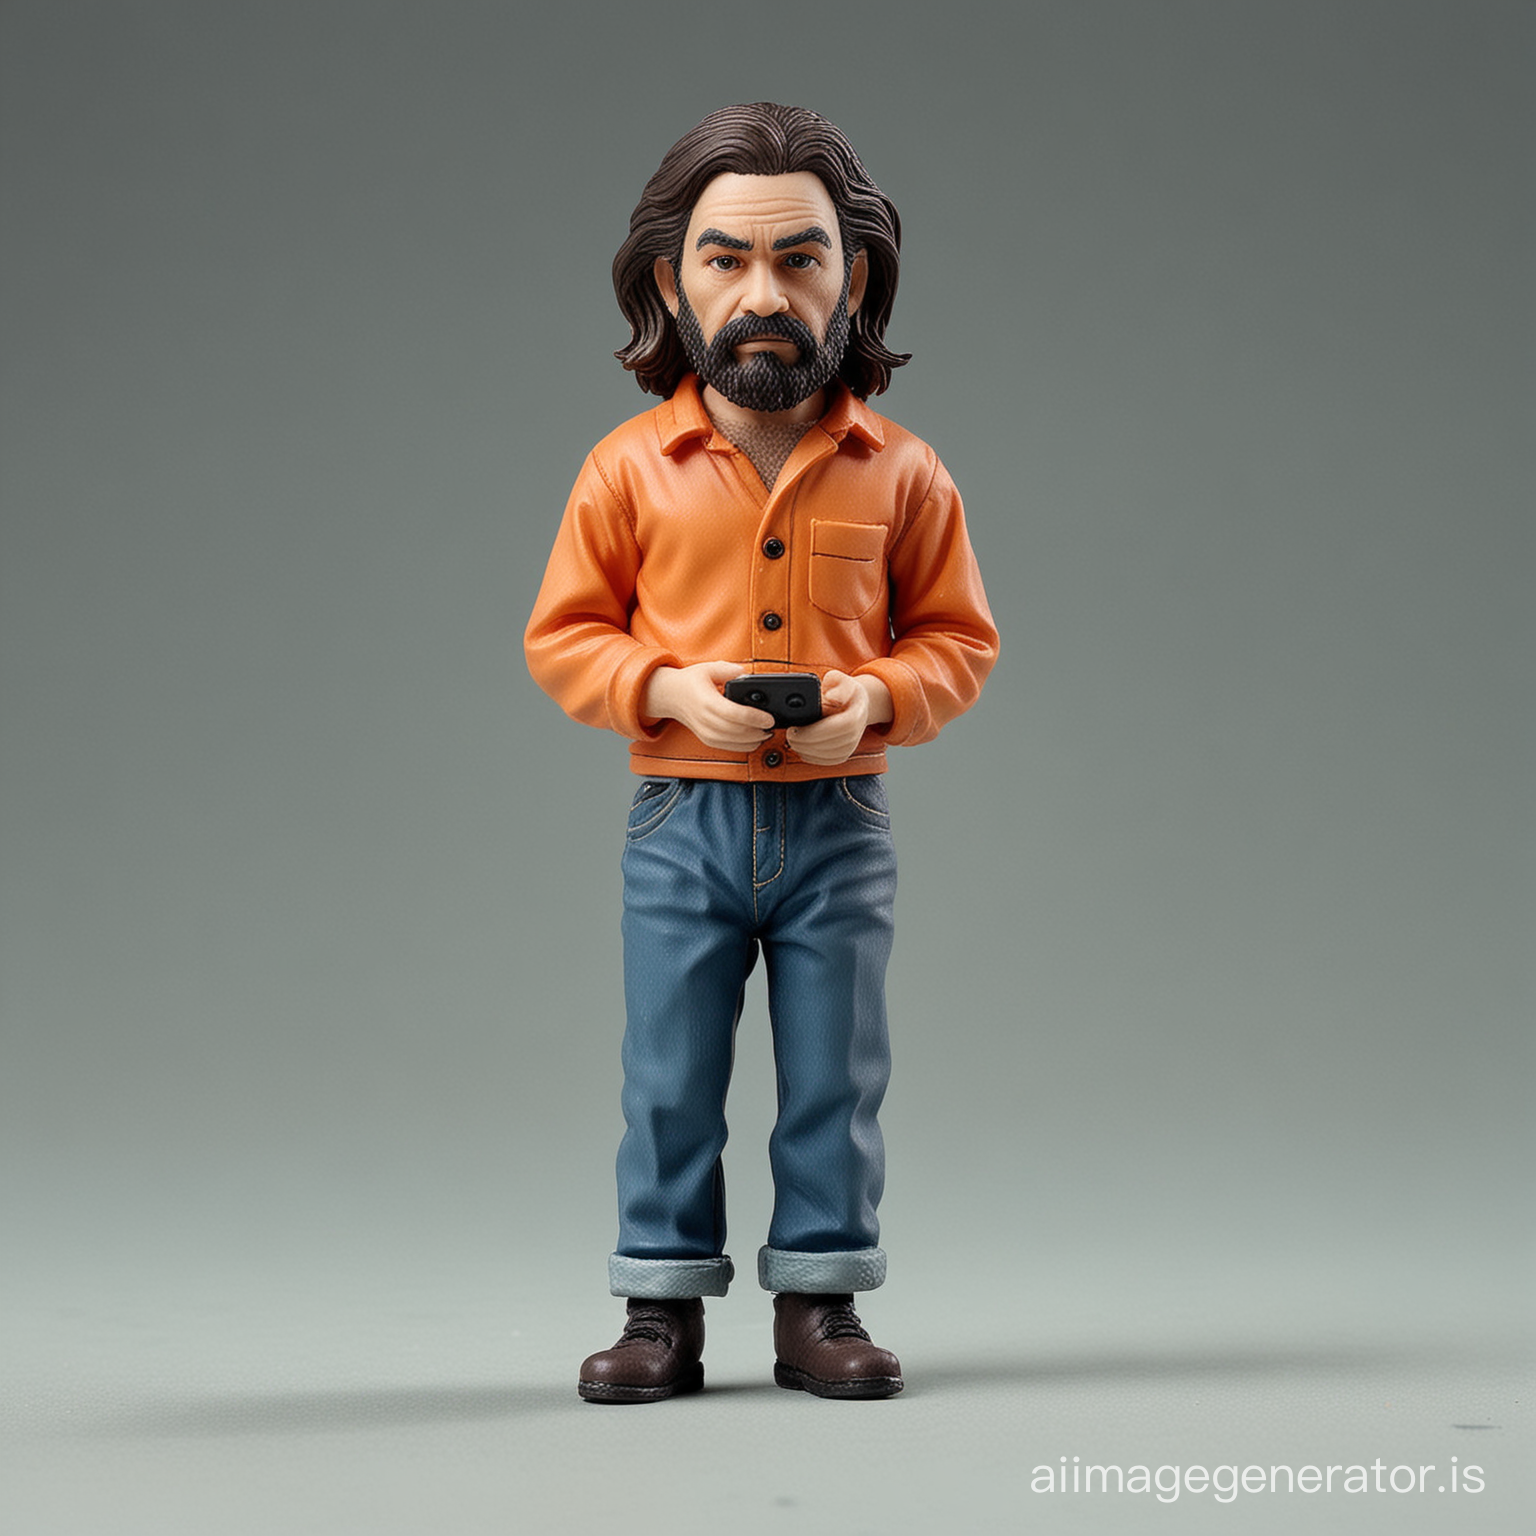 Miniature Charles Manson, kid, toy, full body, side profile, he is staring at his phone, isolated